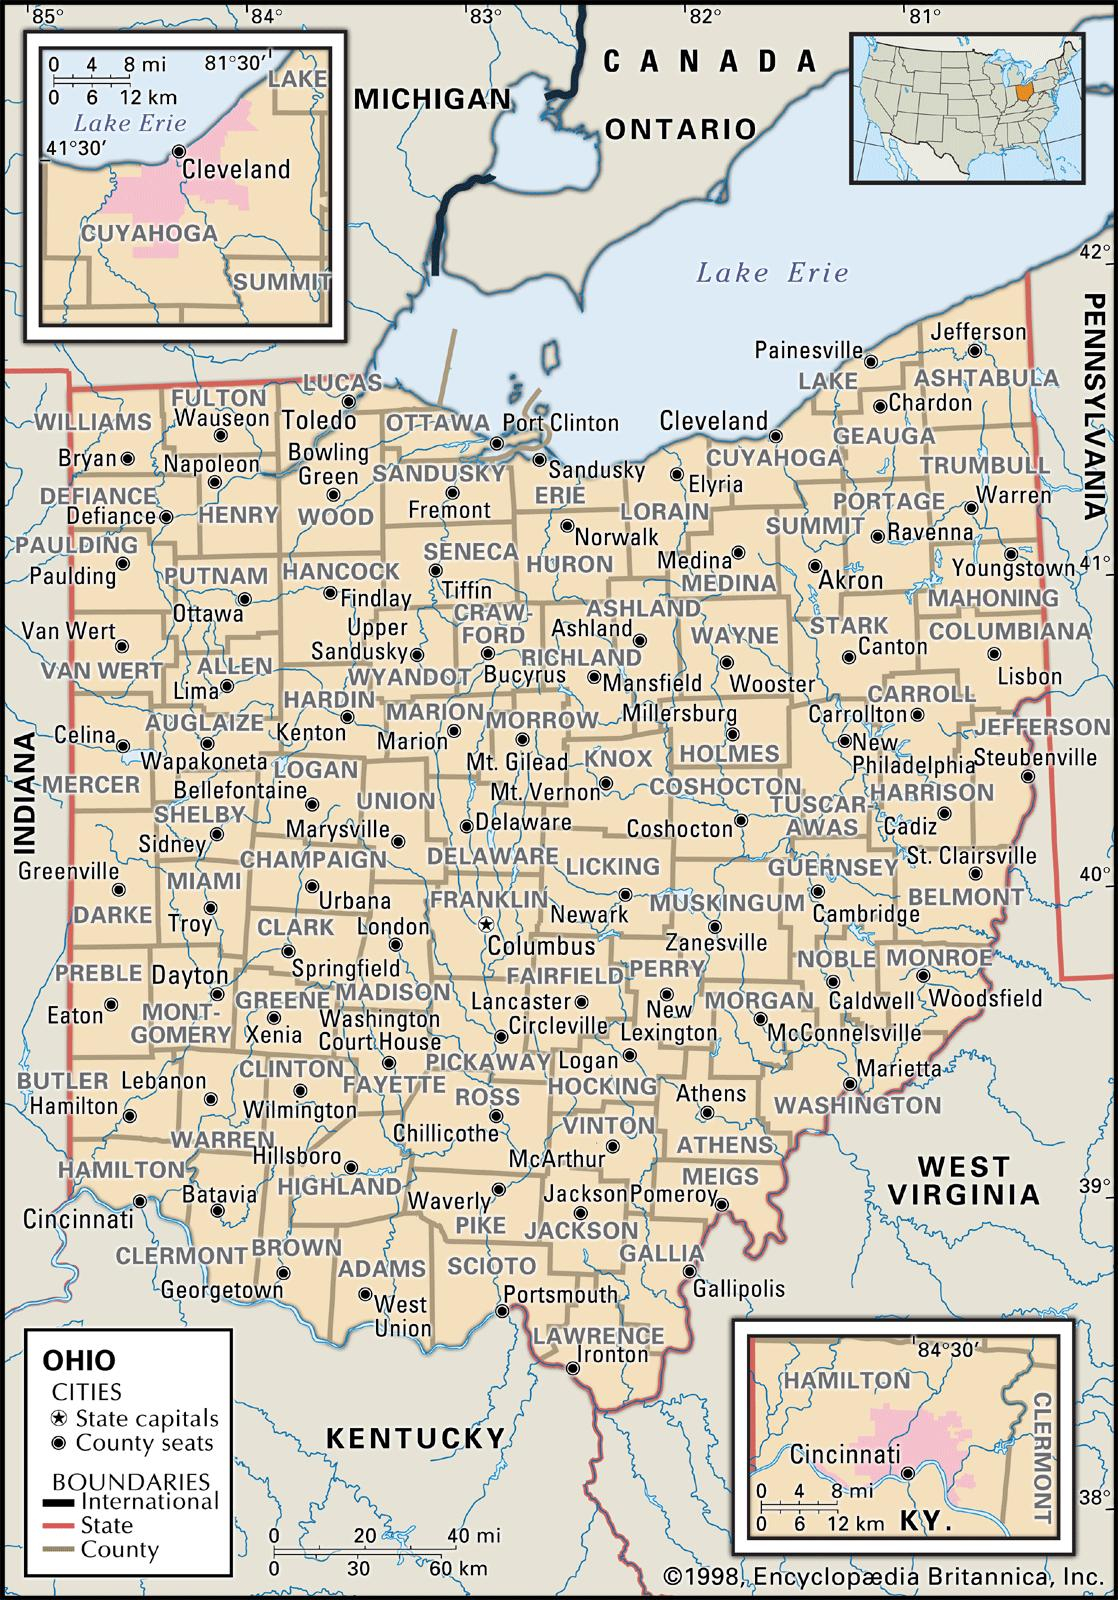 State And County Maps Of Ohio